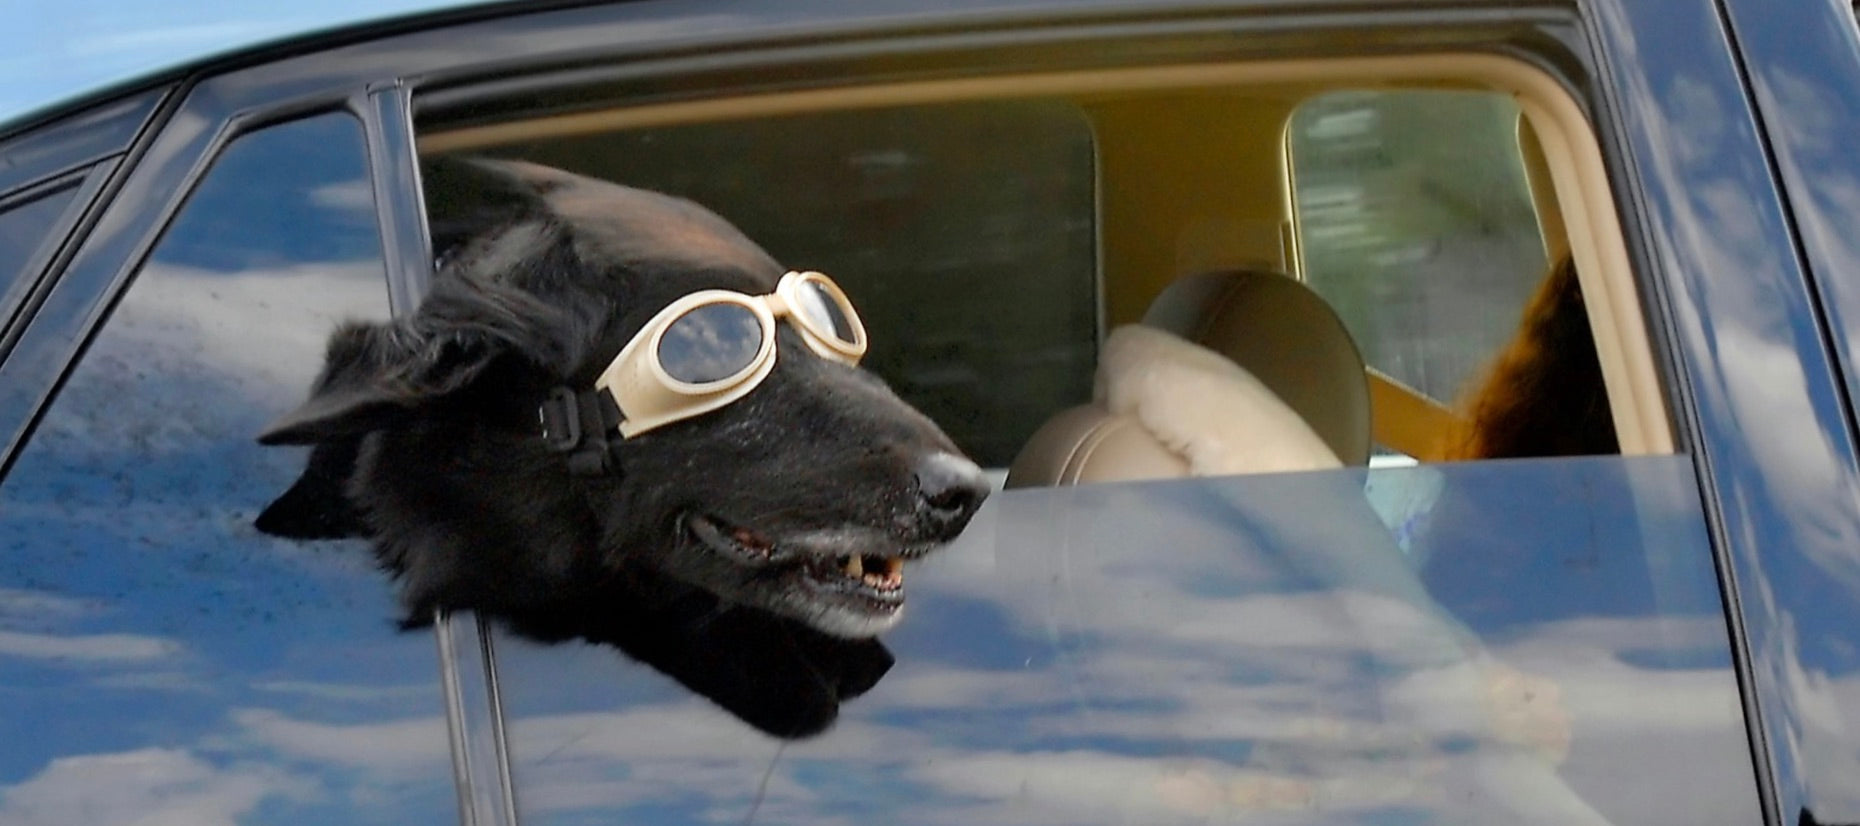 A dog wearing sunglasses with his head out the car window.